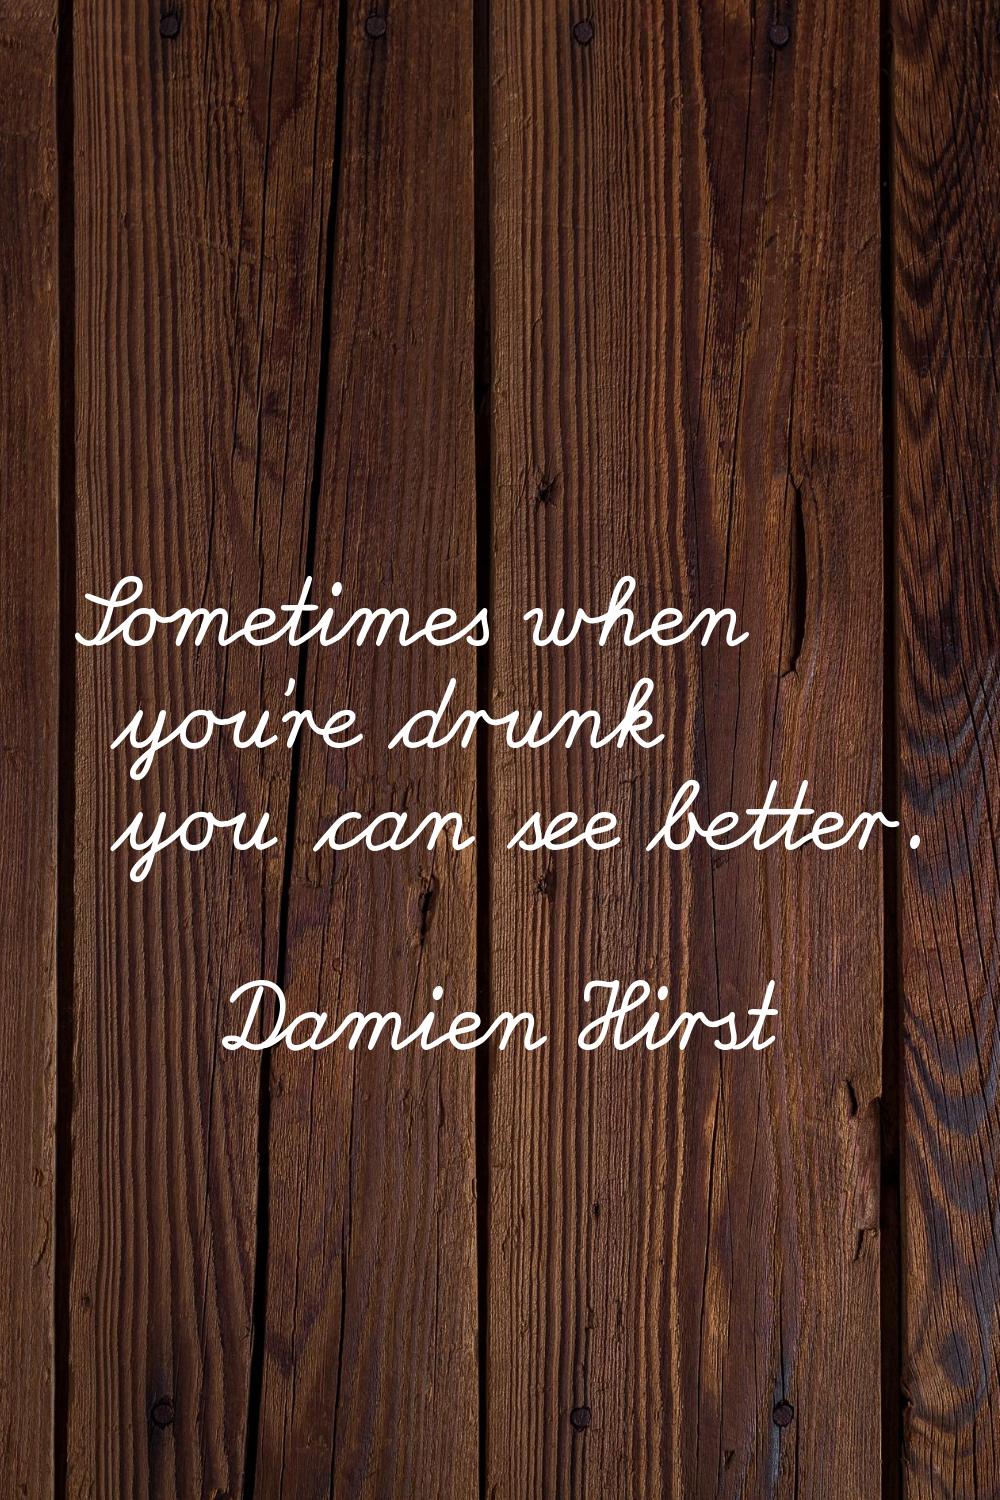 Sometimes when you're drunk you can see better.